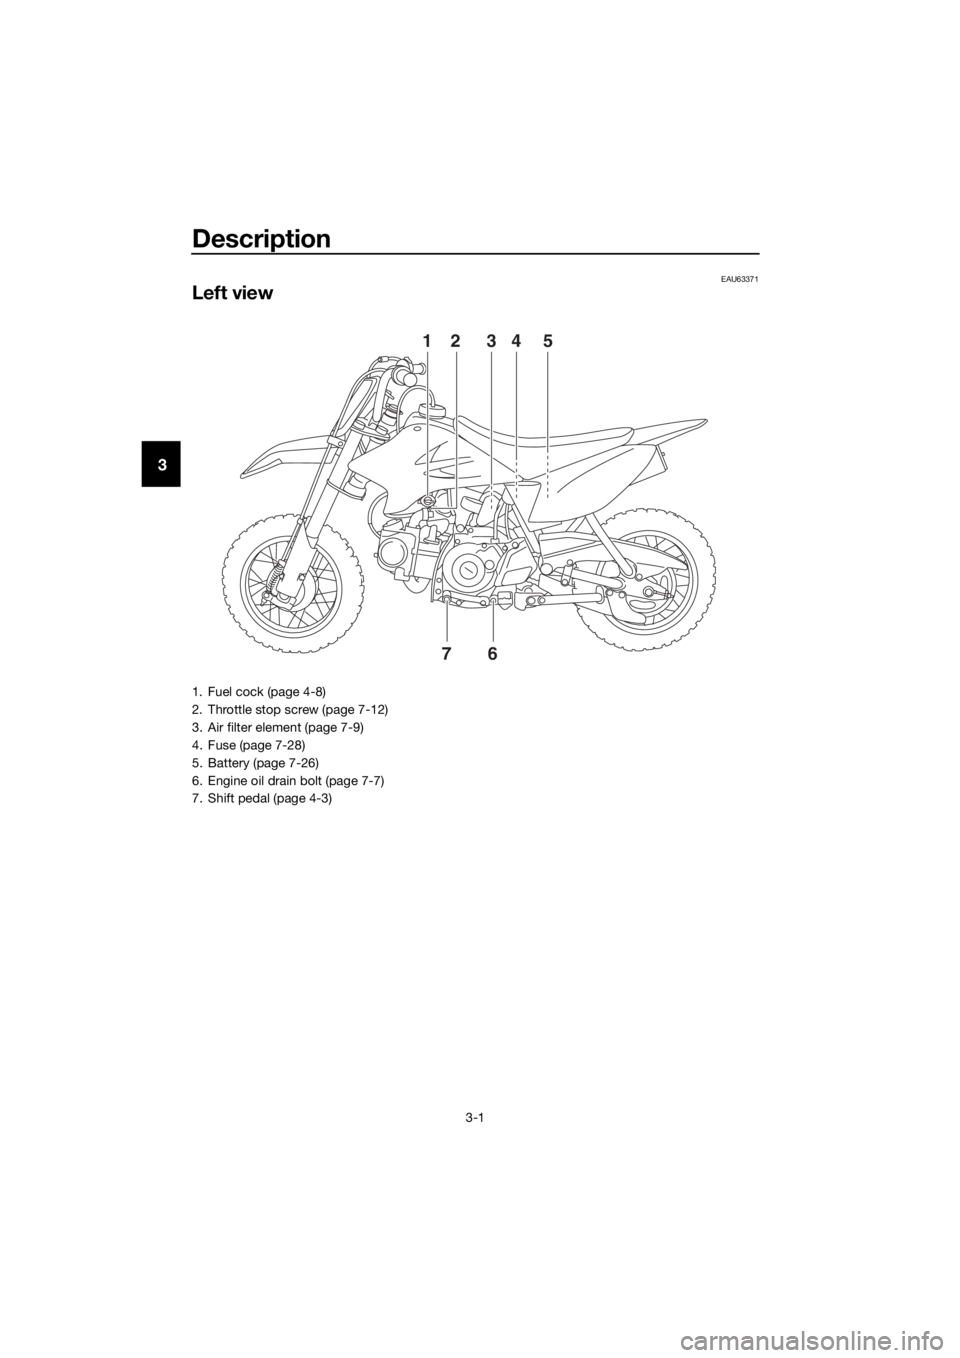 YAMAHA TT-R50E 2016  Owners Manual Description
3-1
3
EAU63371
Left view
12 34 576
1. Fuel cock (page 4-8)
2. Throttle stop screw (page 7-12)
3. Air filter element (page 7-9)
4. Fuse (page 7-28)
5. Battery (page 7-26)
6. Engine oil drai